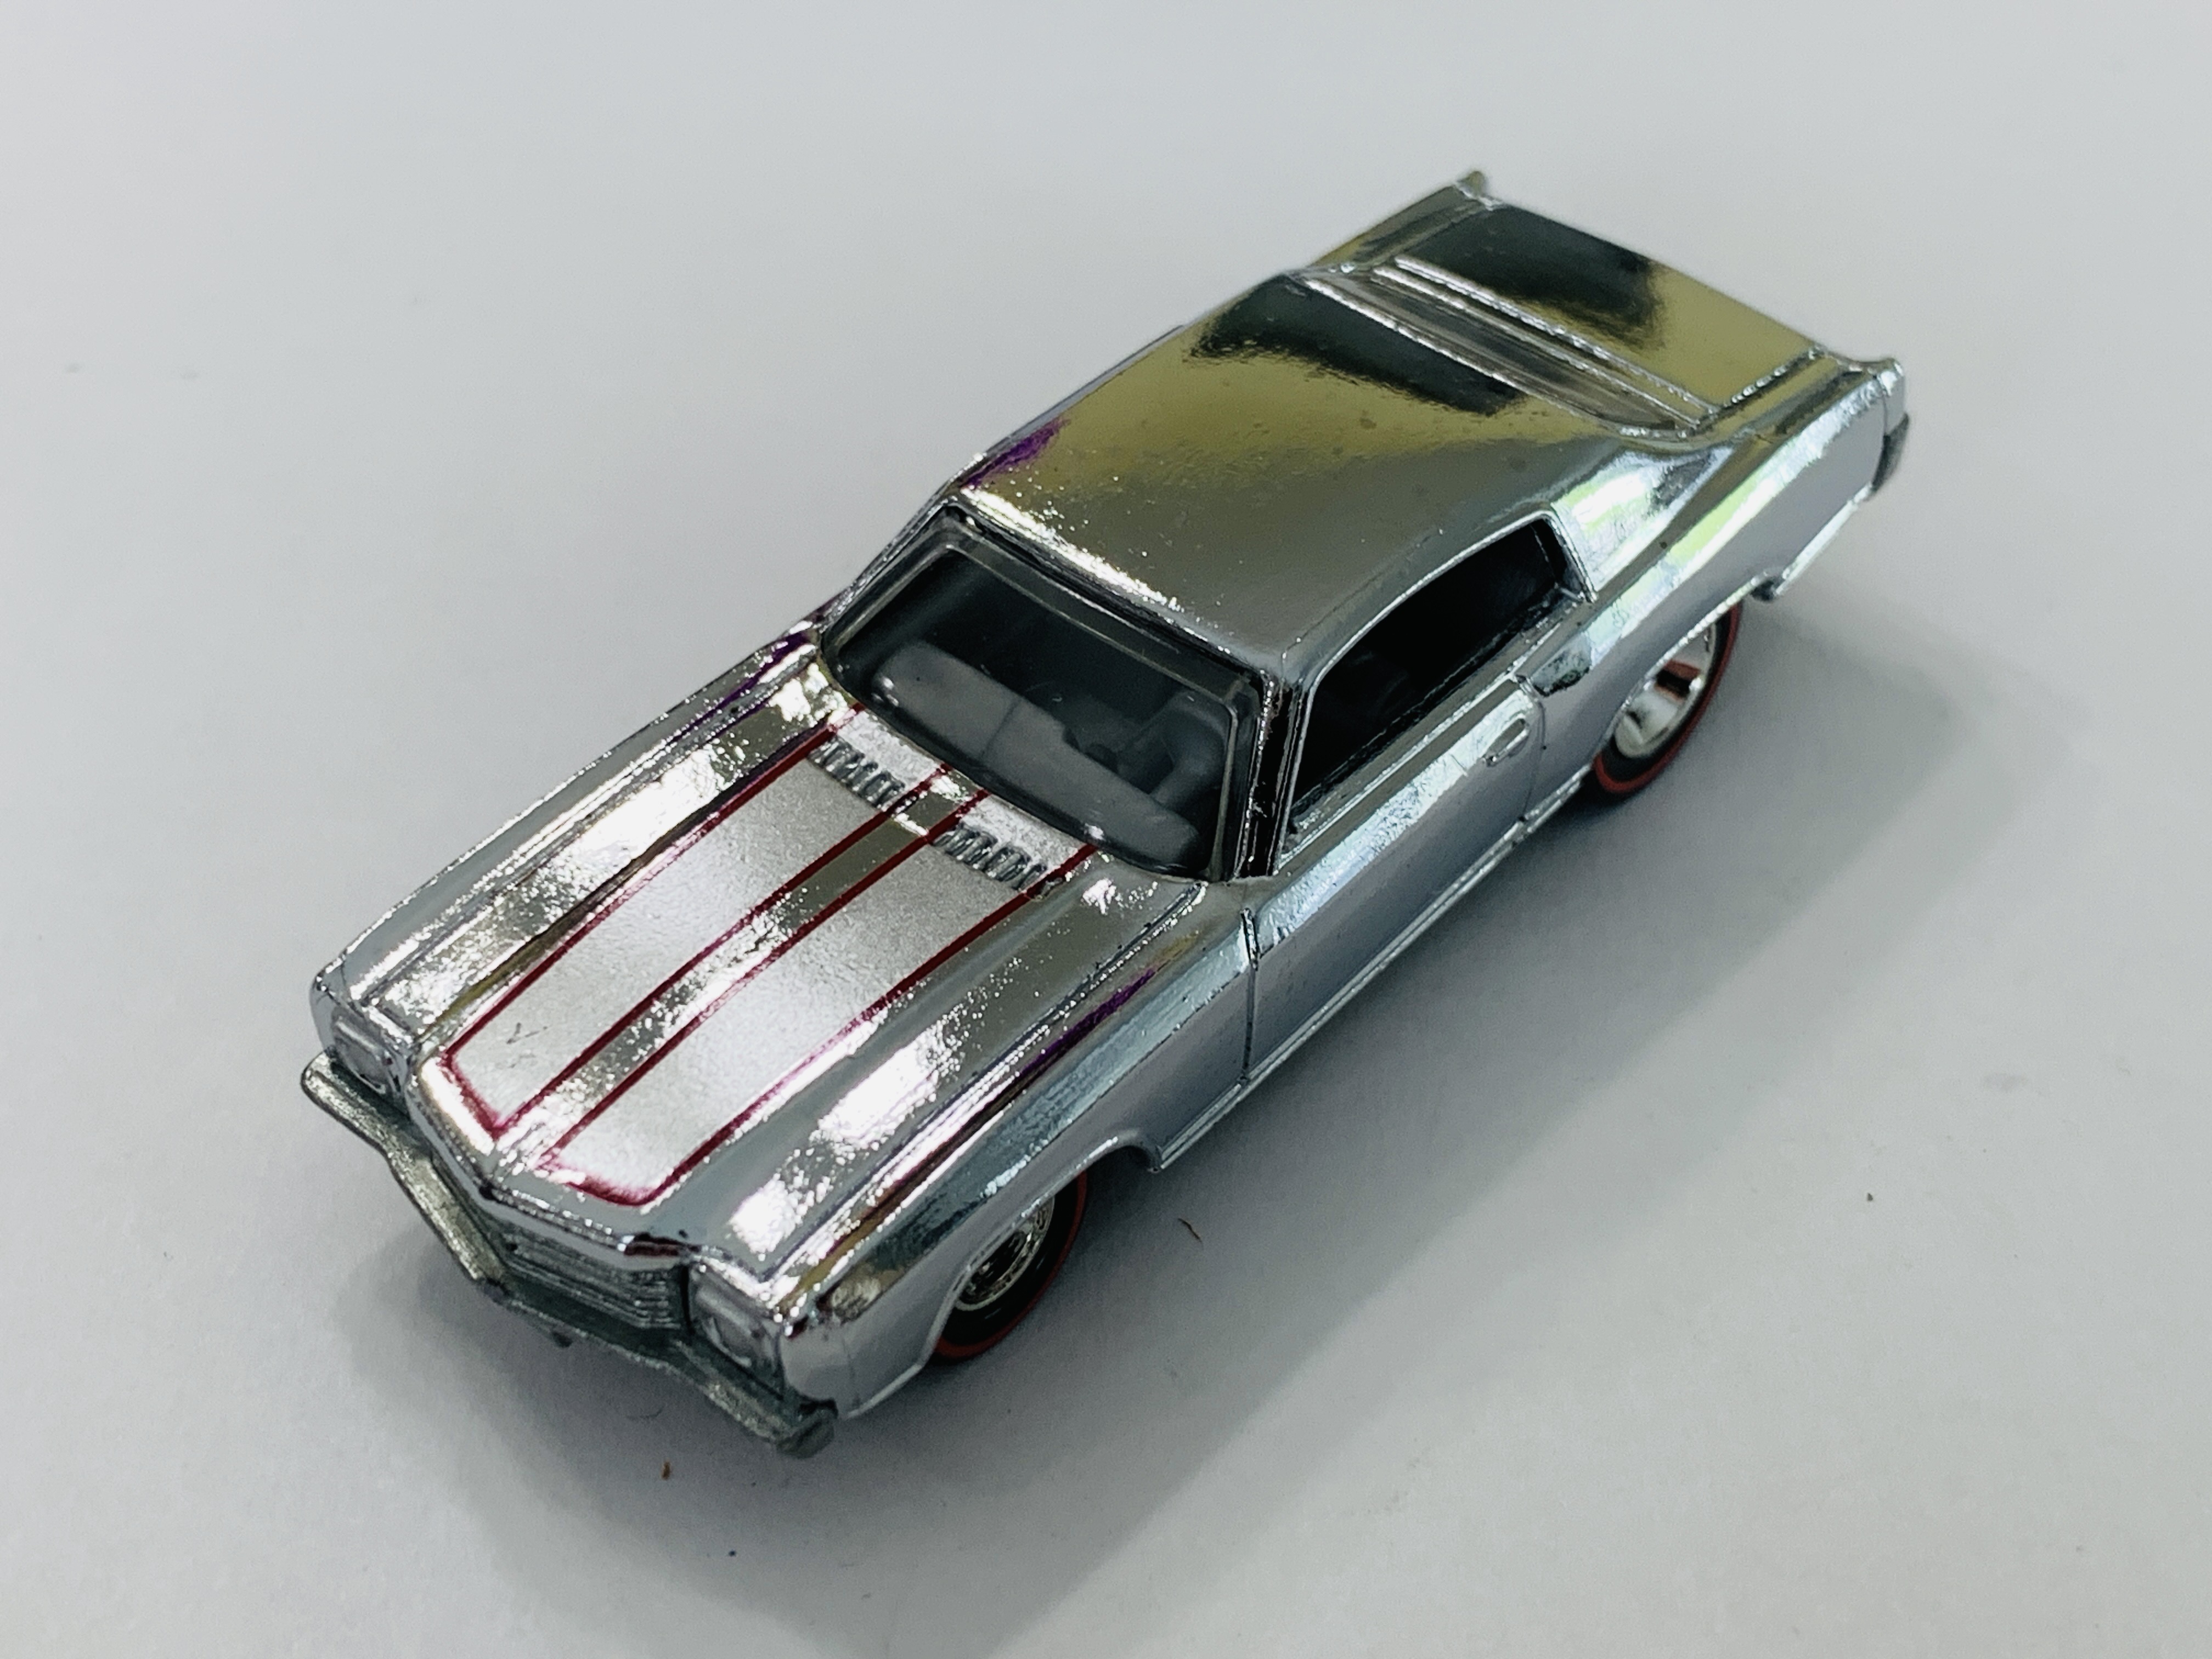 Hot Wheels Classics Series 5 '70 Monte Carlo Chase